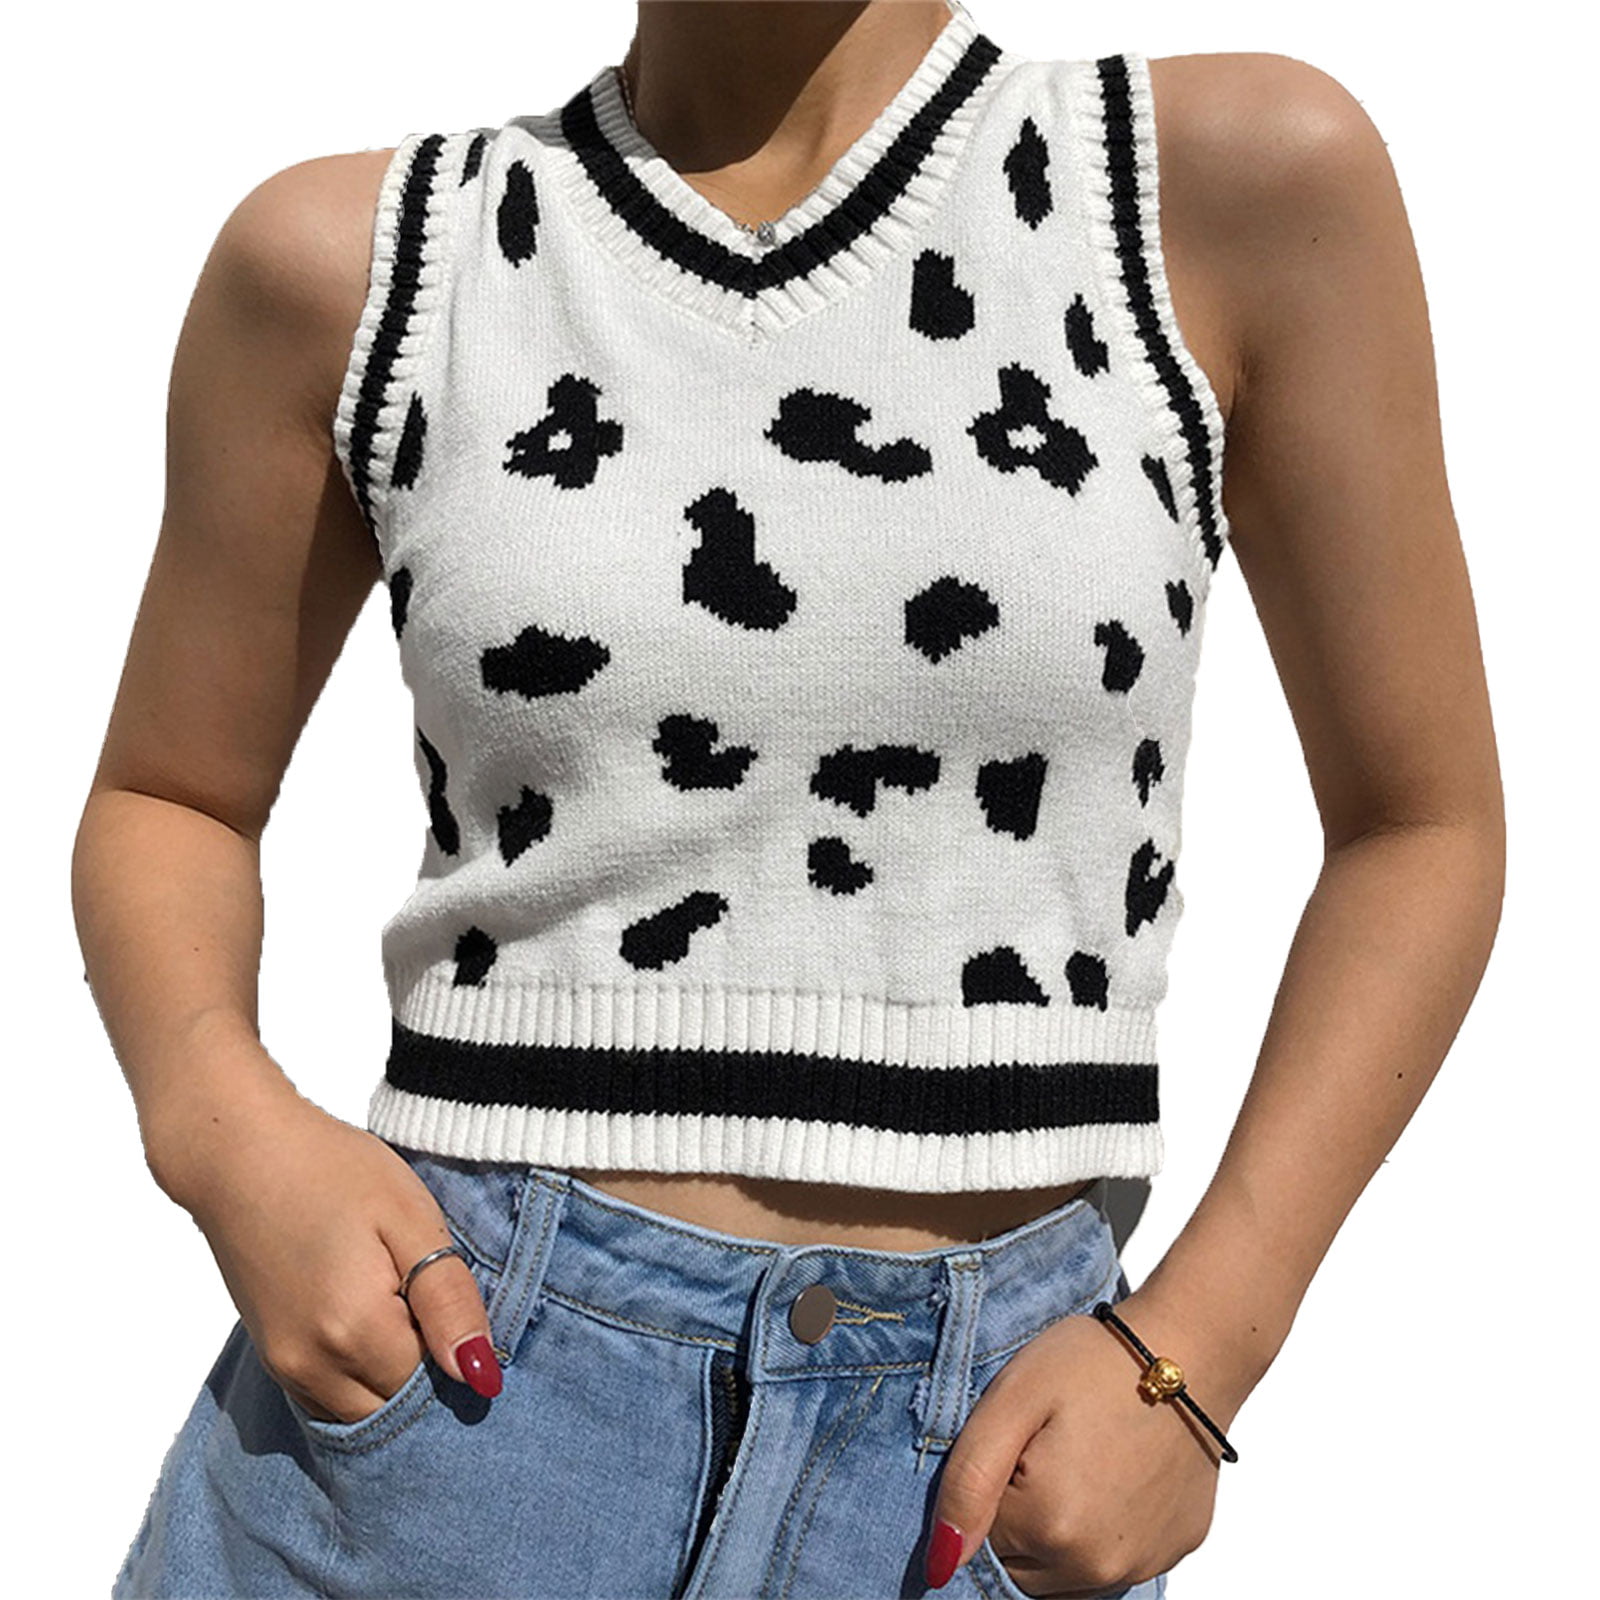 Cow print sweater vest forex free training reviews